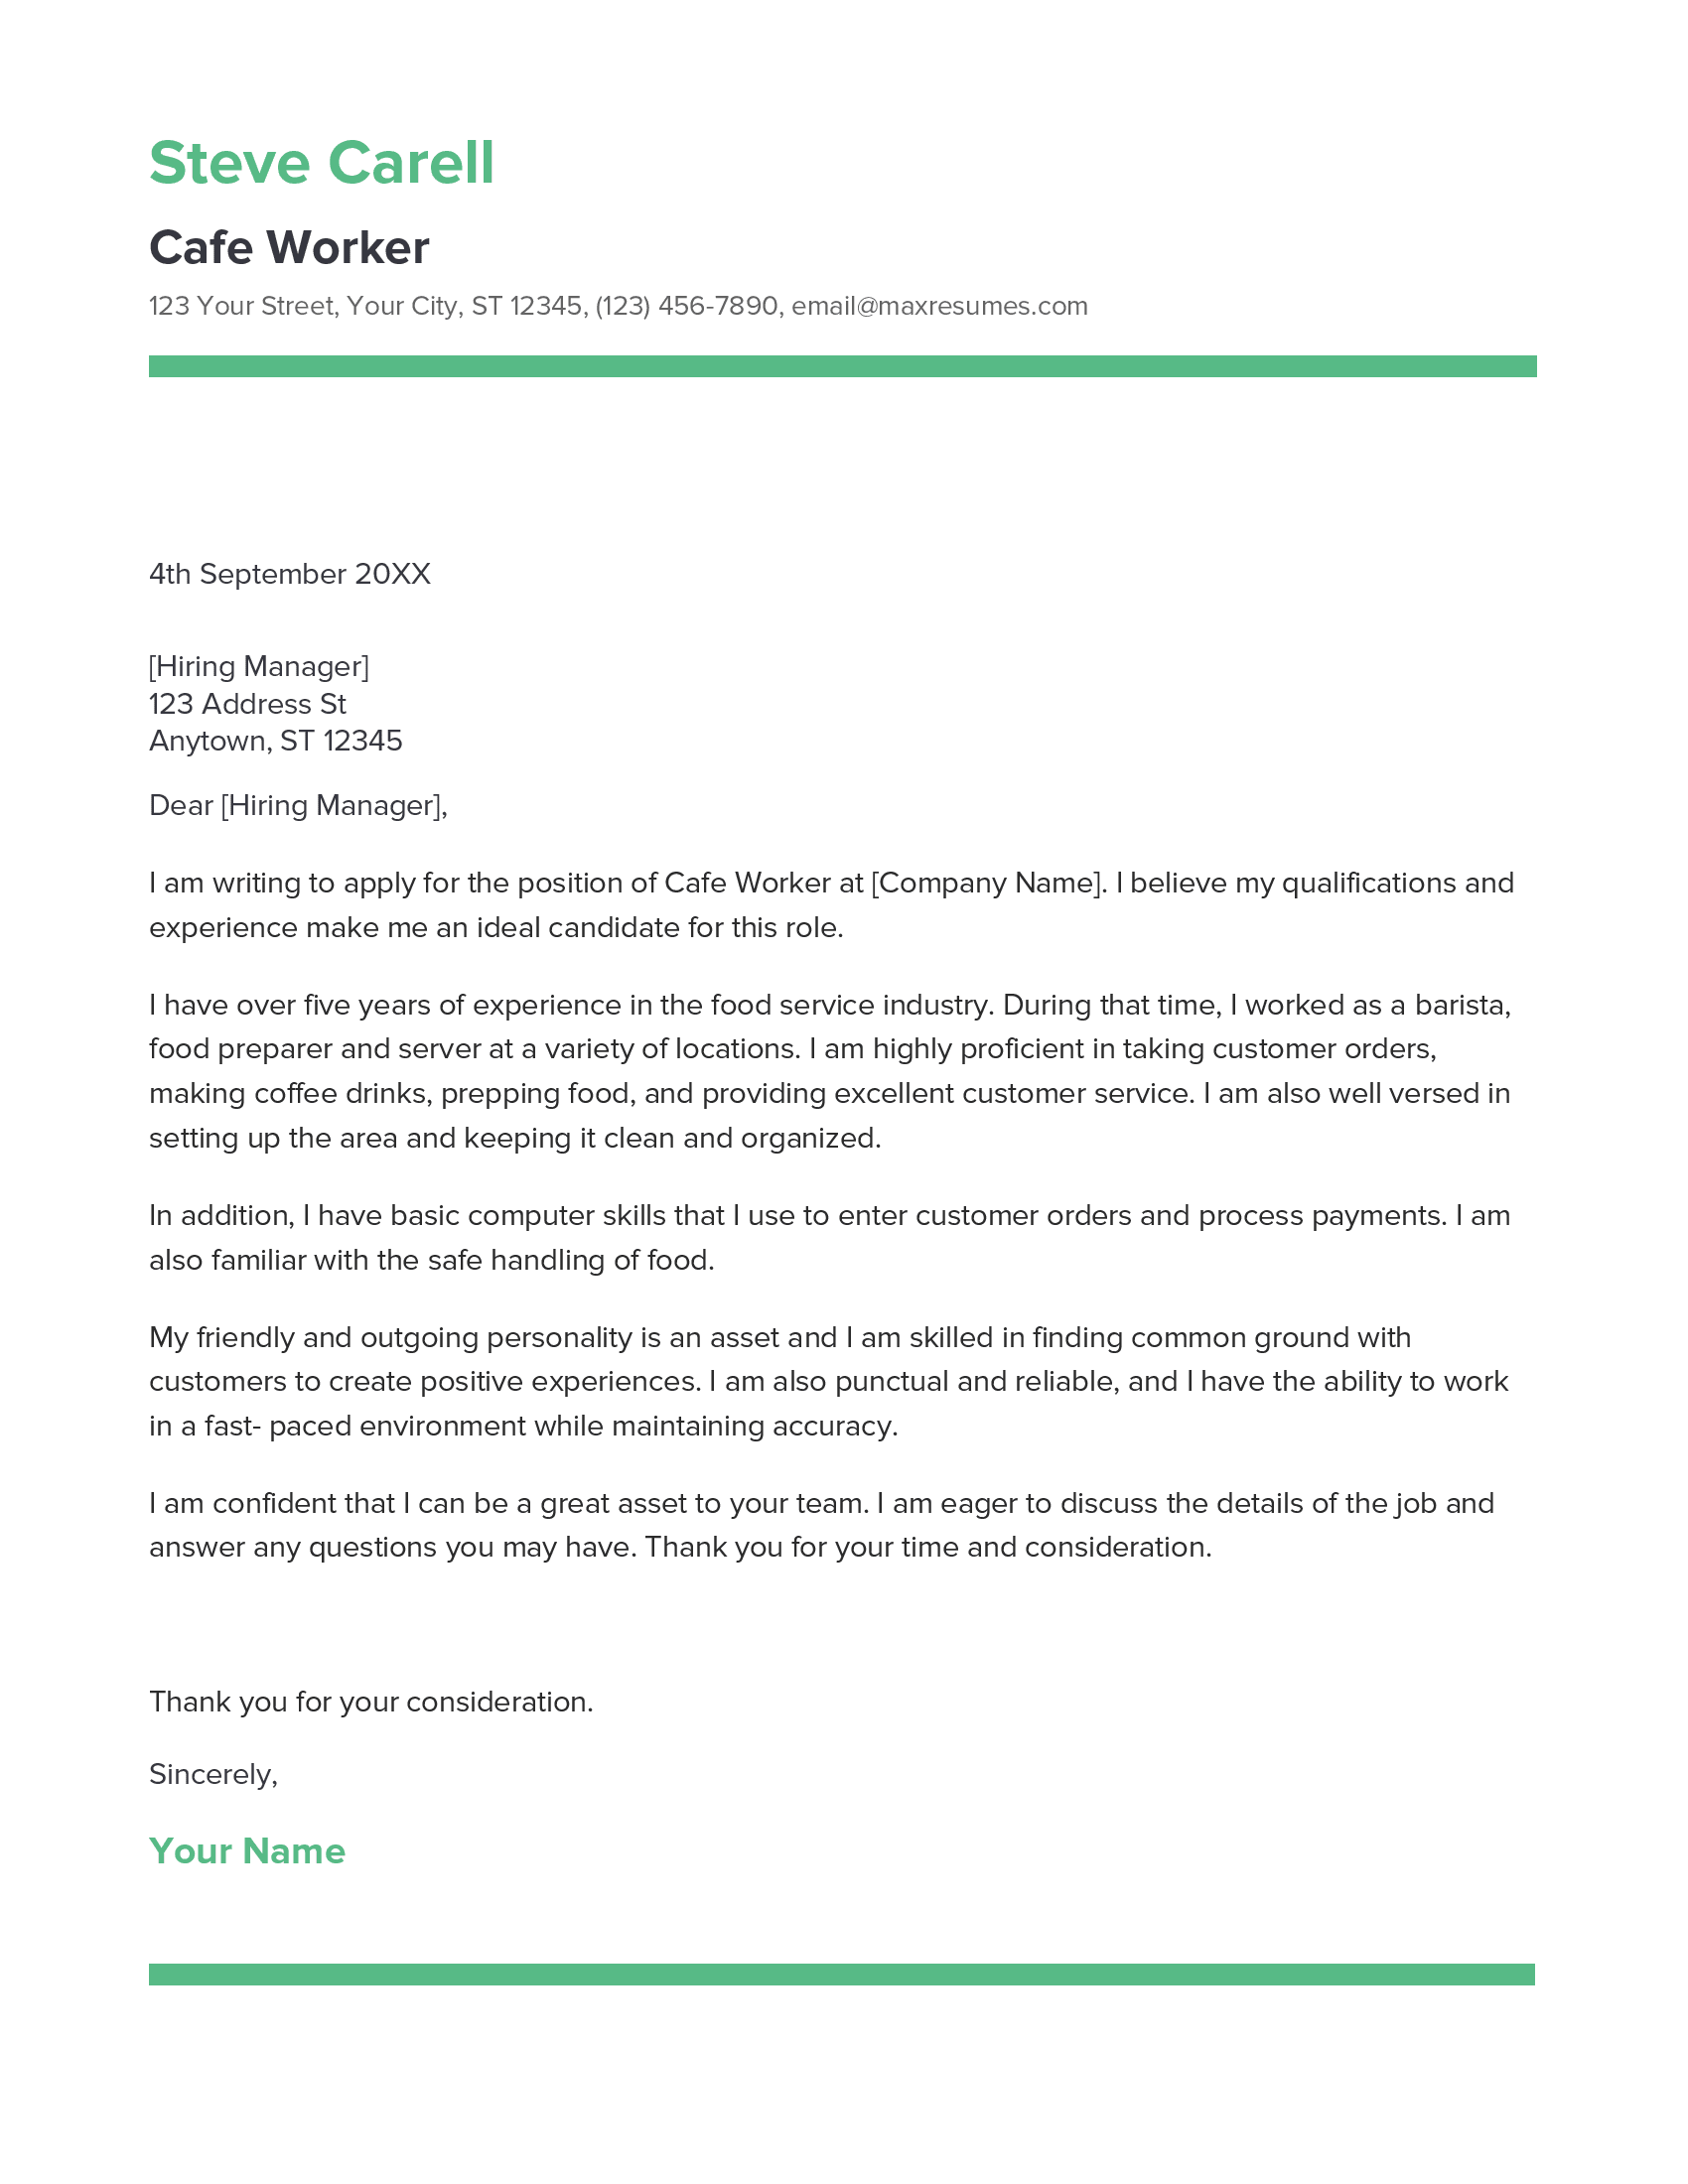 Cafe Worker Cover Letter Example